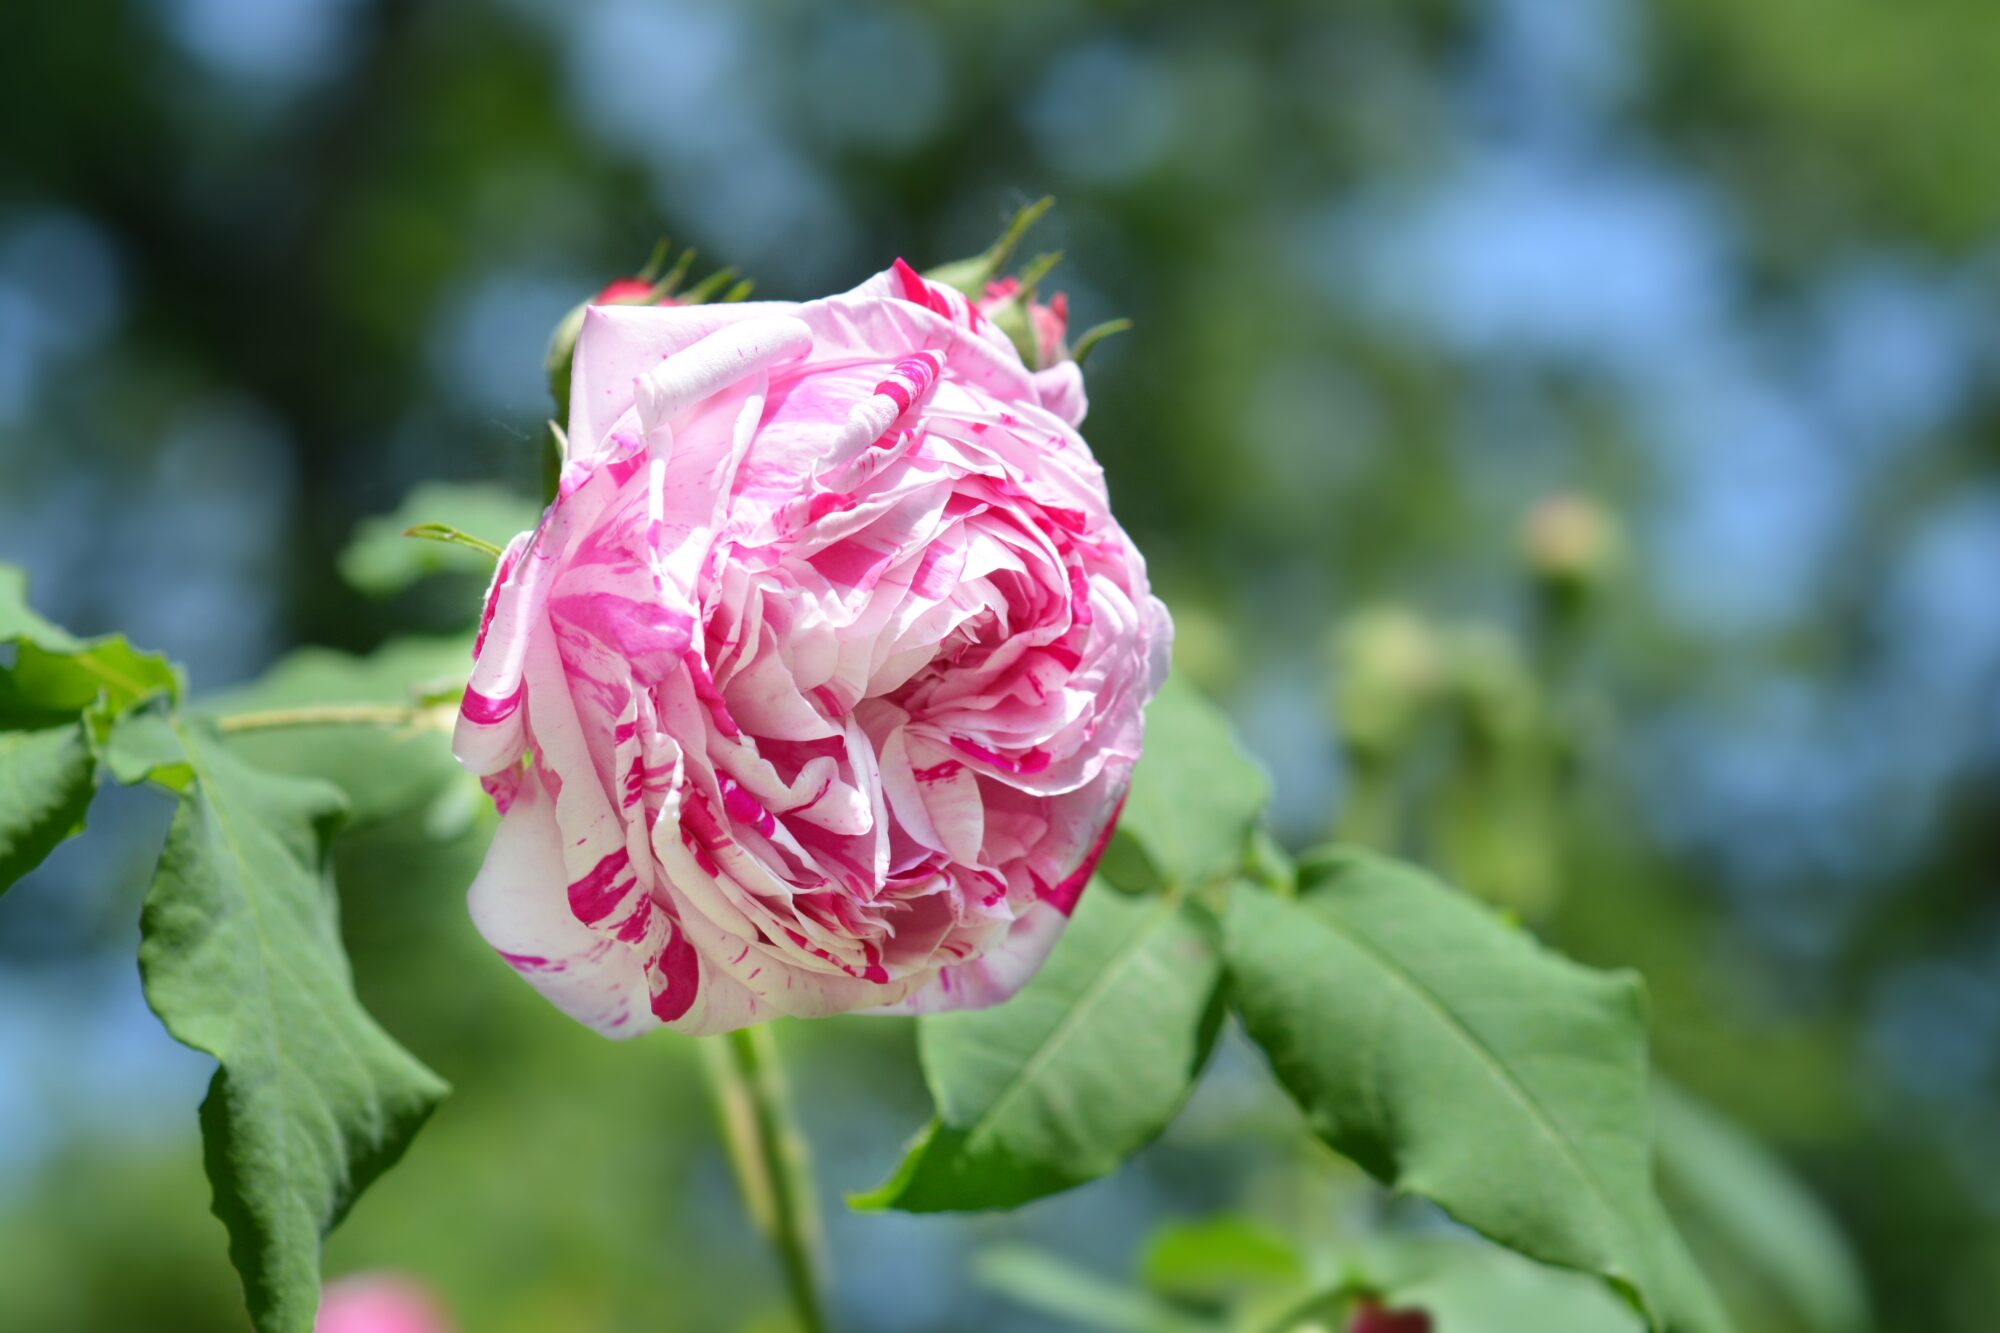 A striking rose with swirled pink and white petals, set against a soft, natural backdrop.